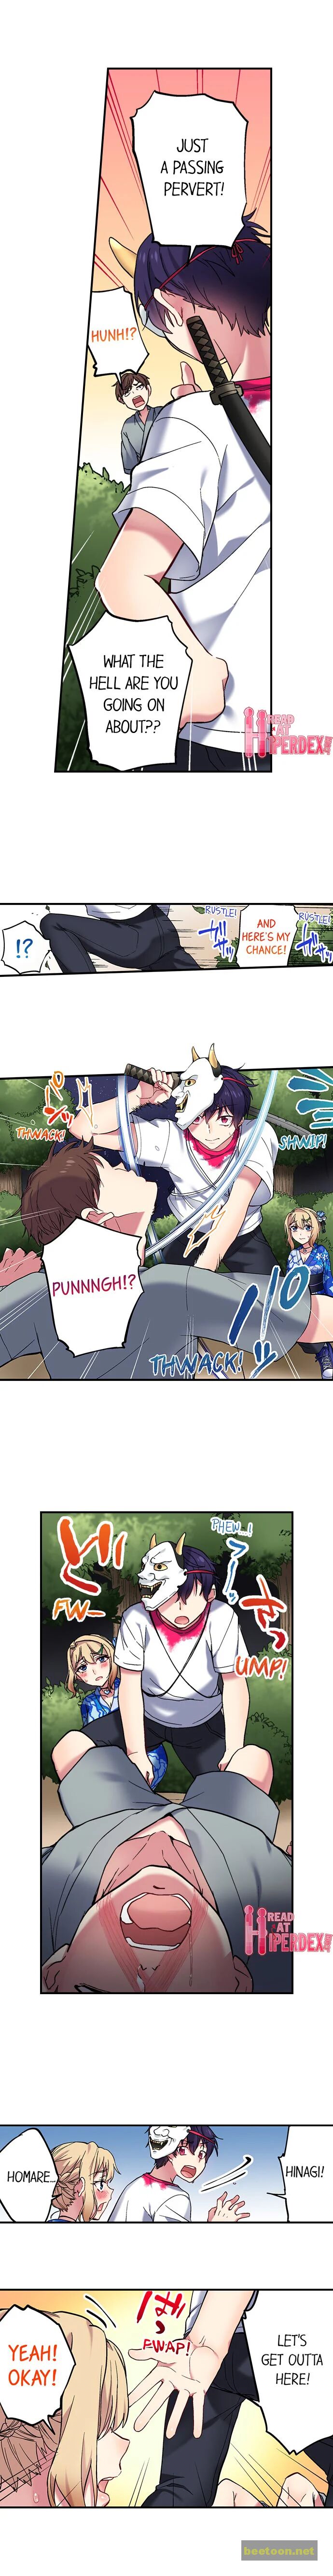 I Can See The Number Of Times People Orgasm Chapter 88 - HolyManga.net